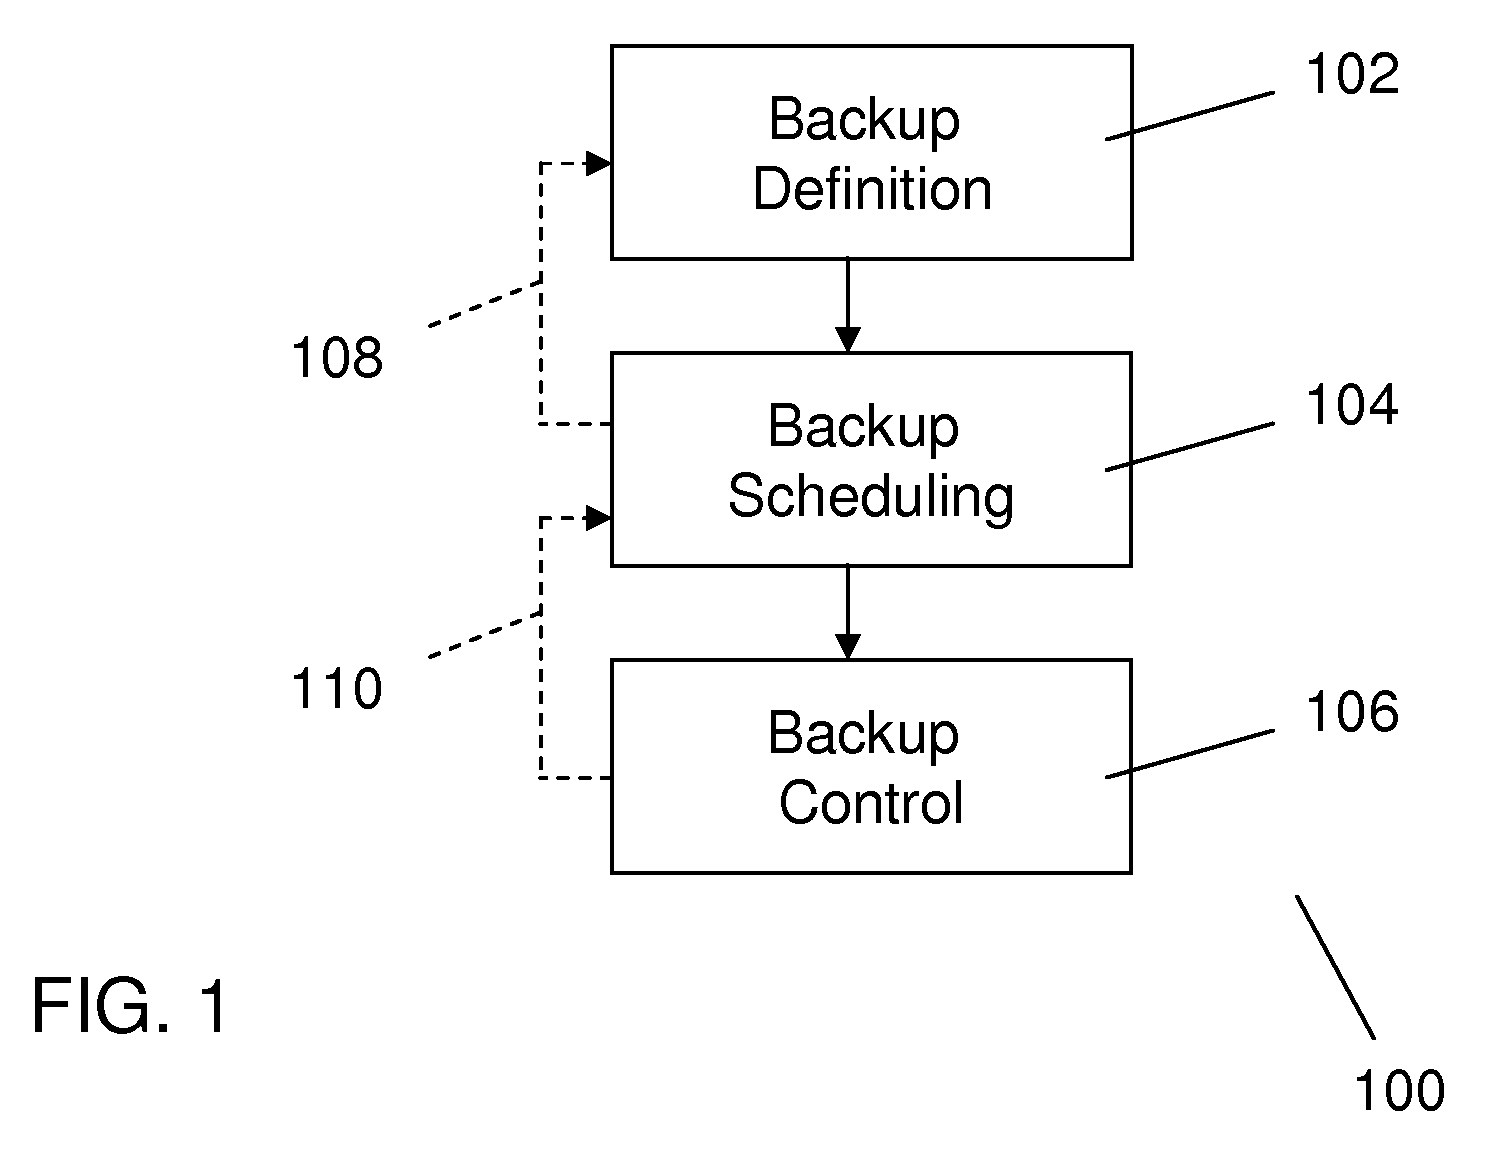 Method and System for Scheduling and Controlling Backups in a Computer System